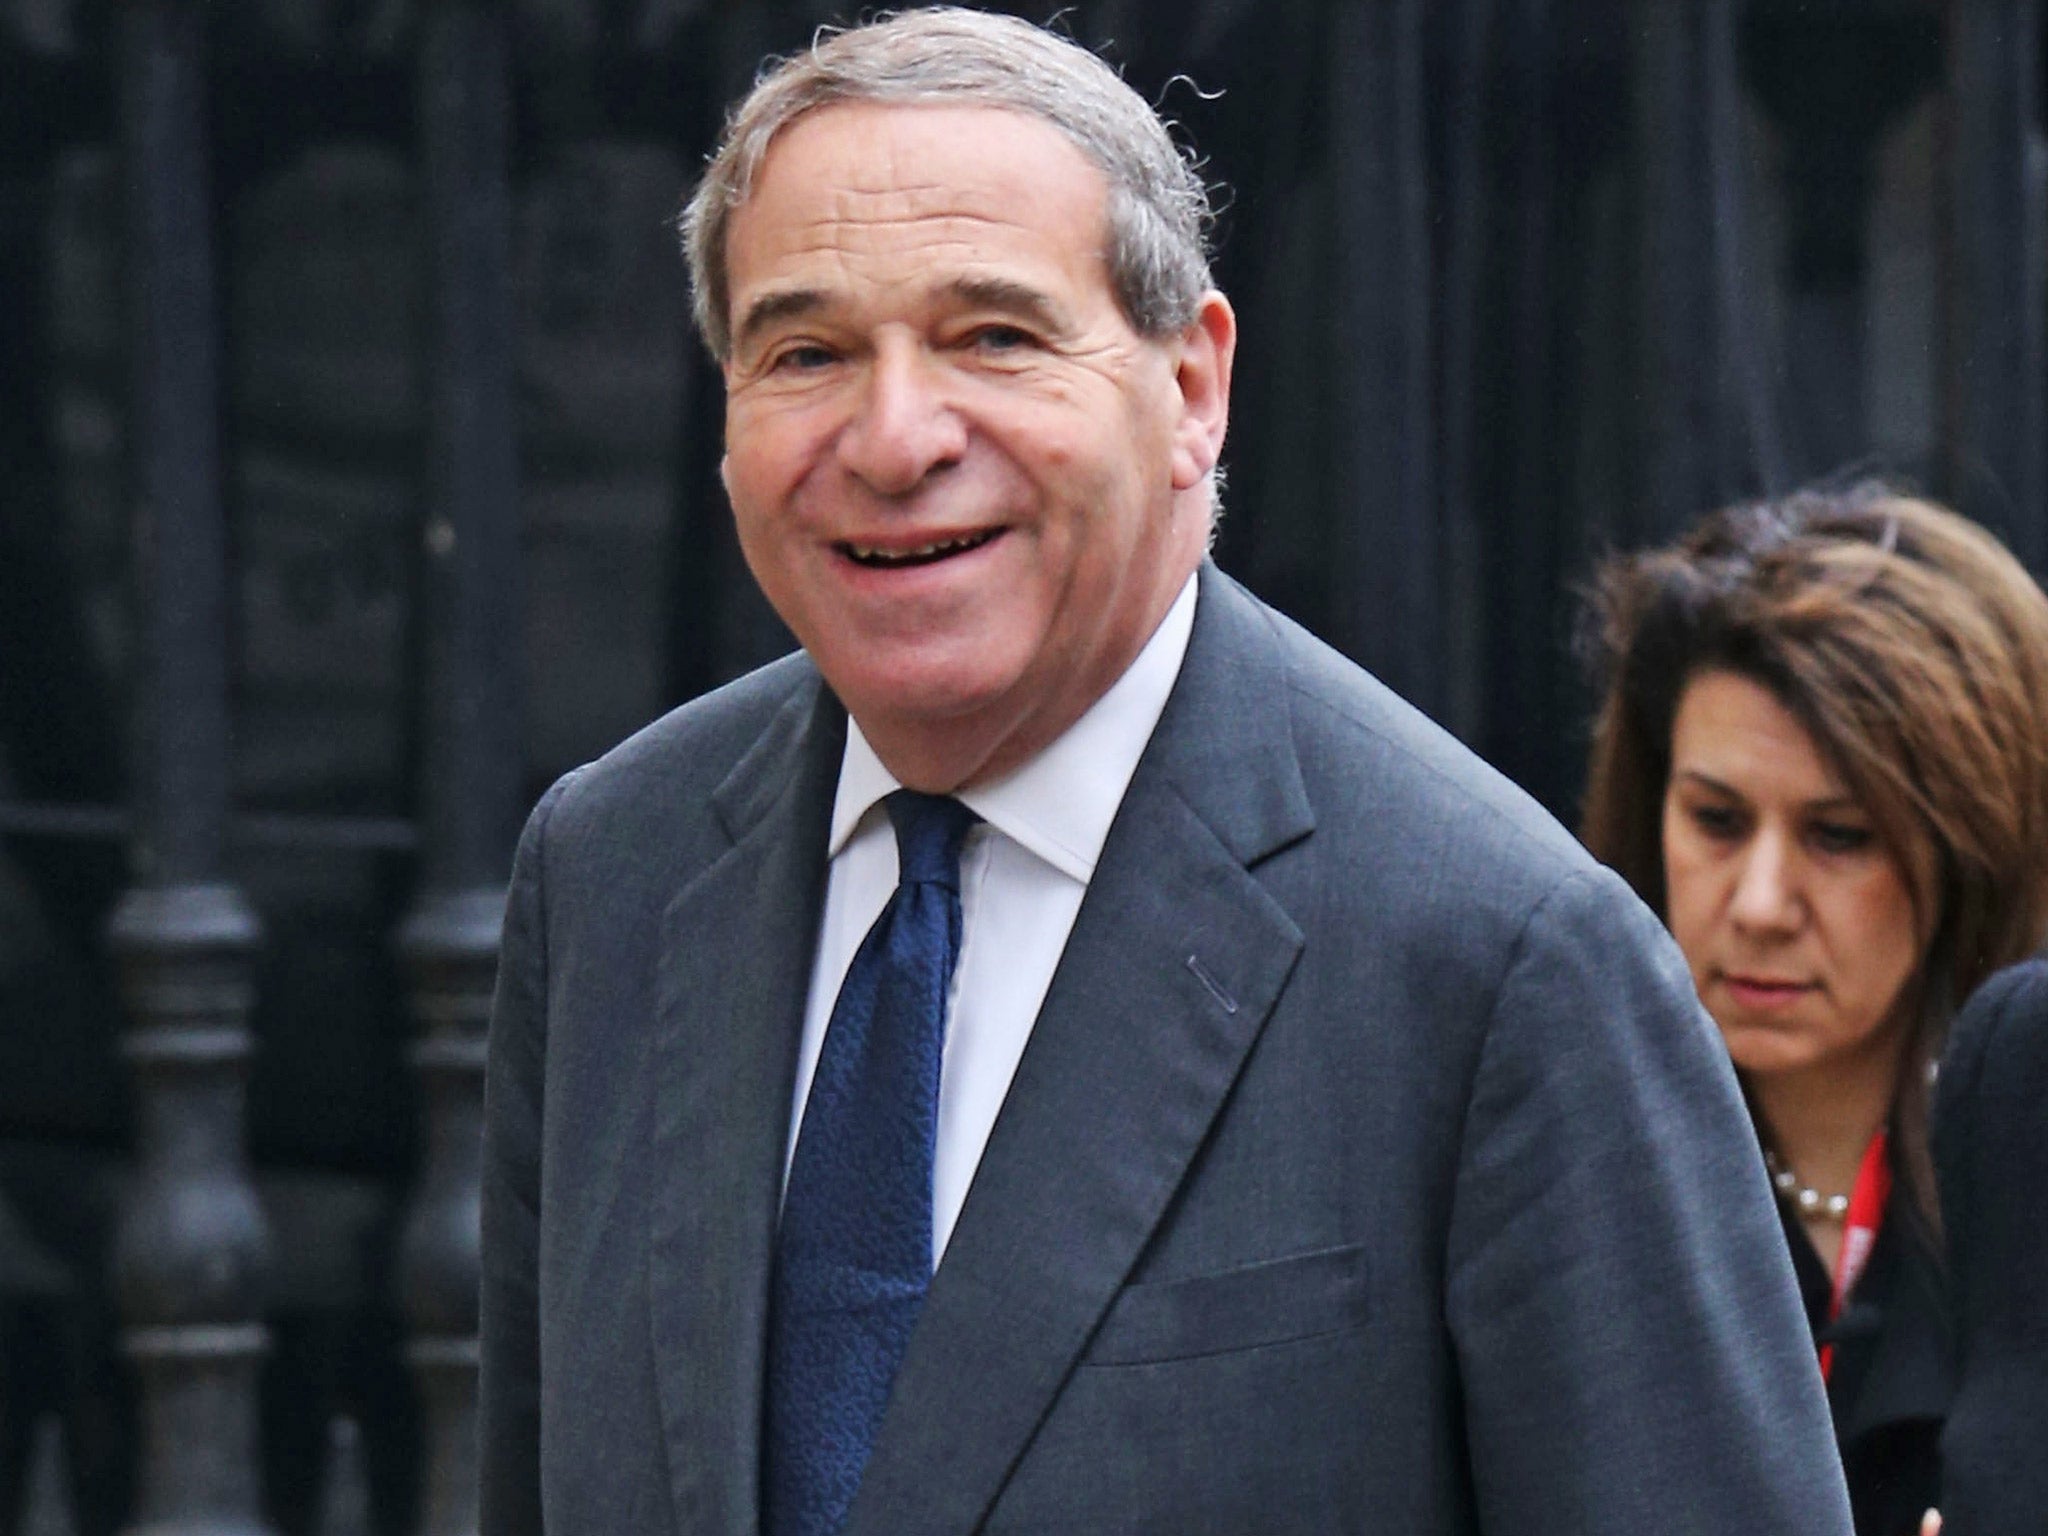 Leon Brittan has said he was handed the Dickens dossier but passed it on to Home Office staff